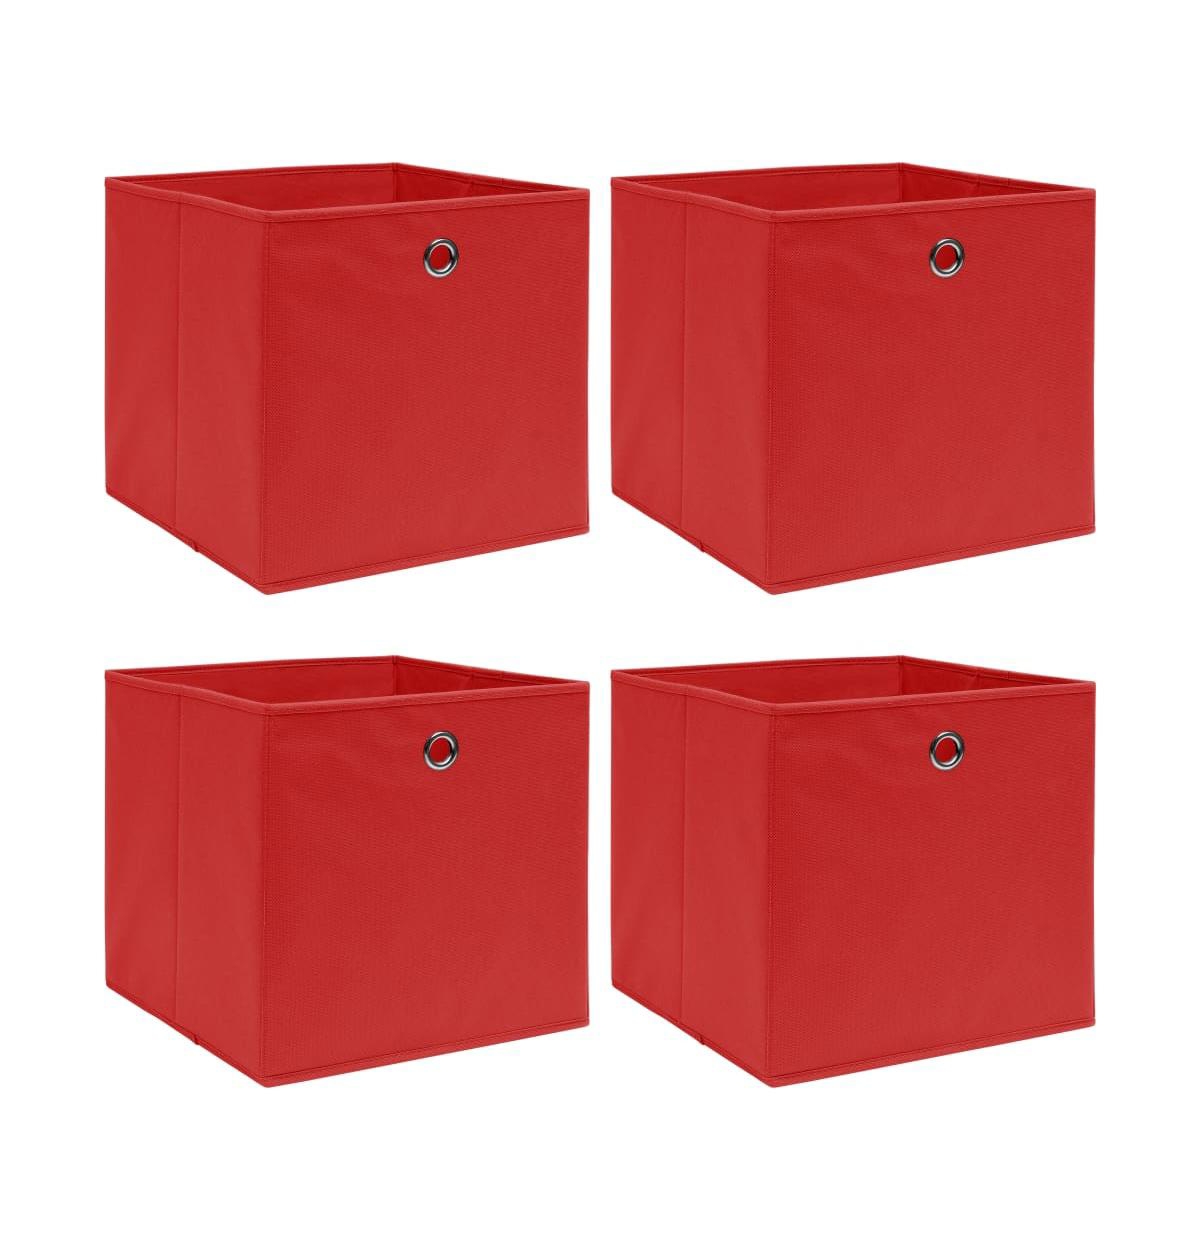 Storage Boxes 4 pcs Red 12.6"x12.6"x12.6" Fabric - Red